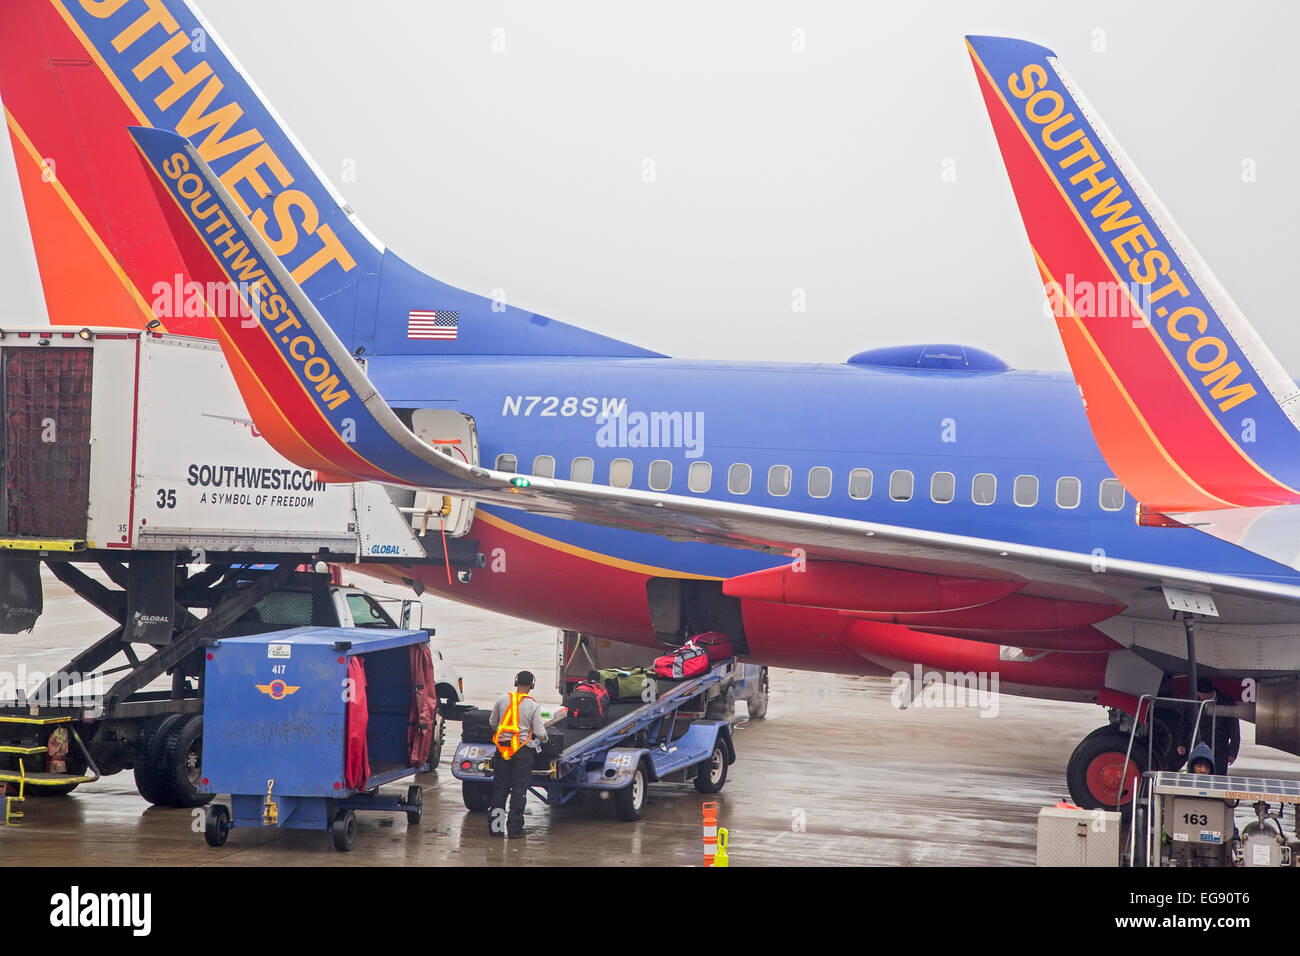 Chicago, Illinois - A member of the Southwest Airlines ground crew at Midway Airport unloads luggage from a Boeing 737. Stock Photo